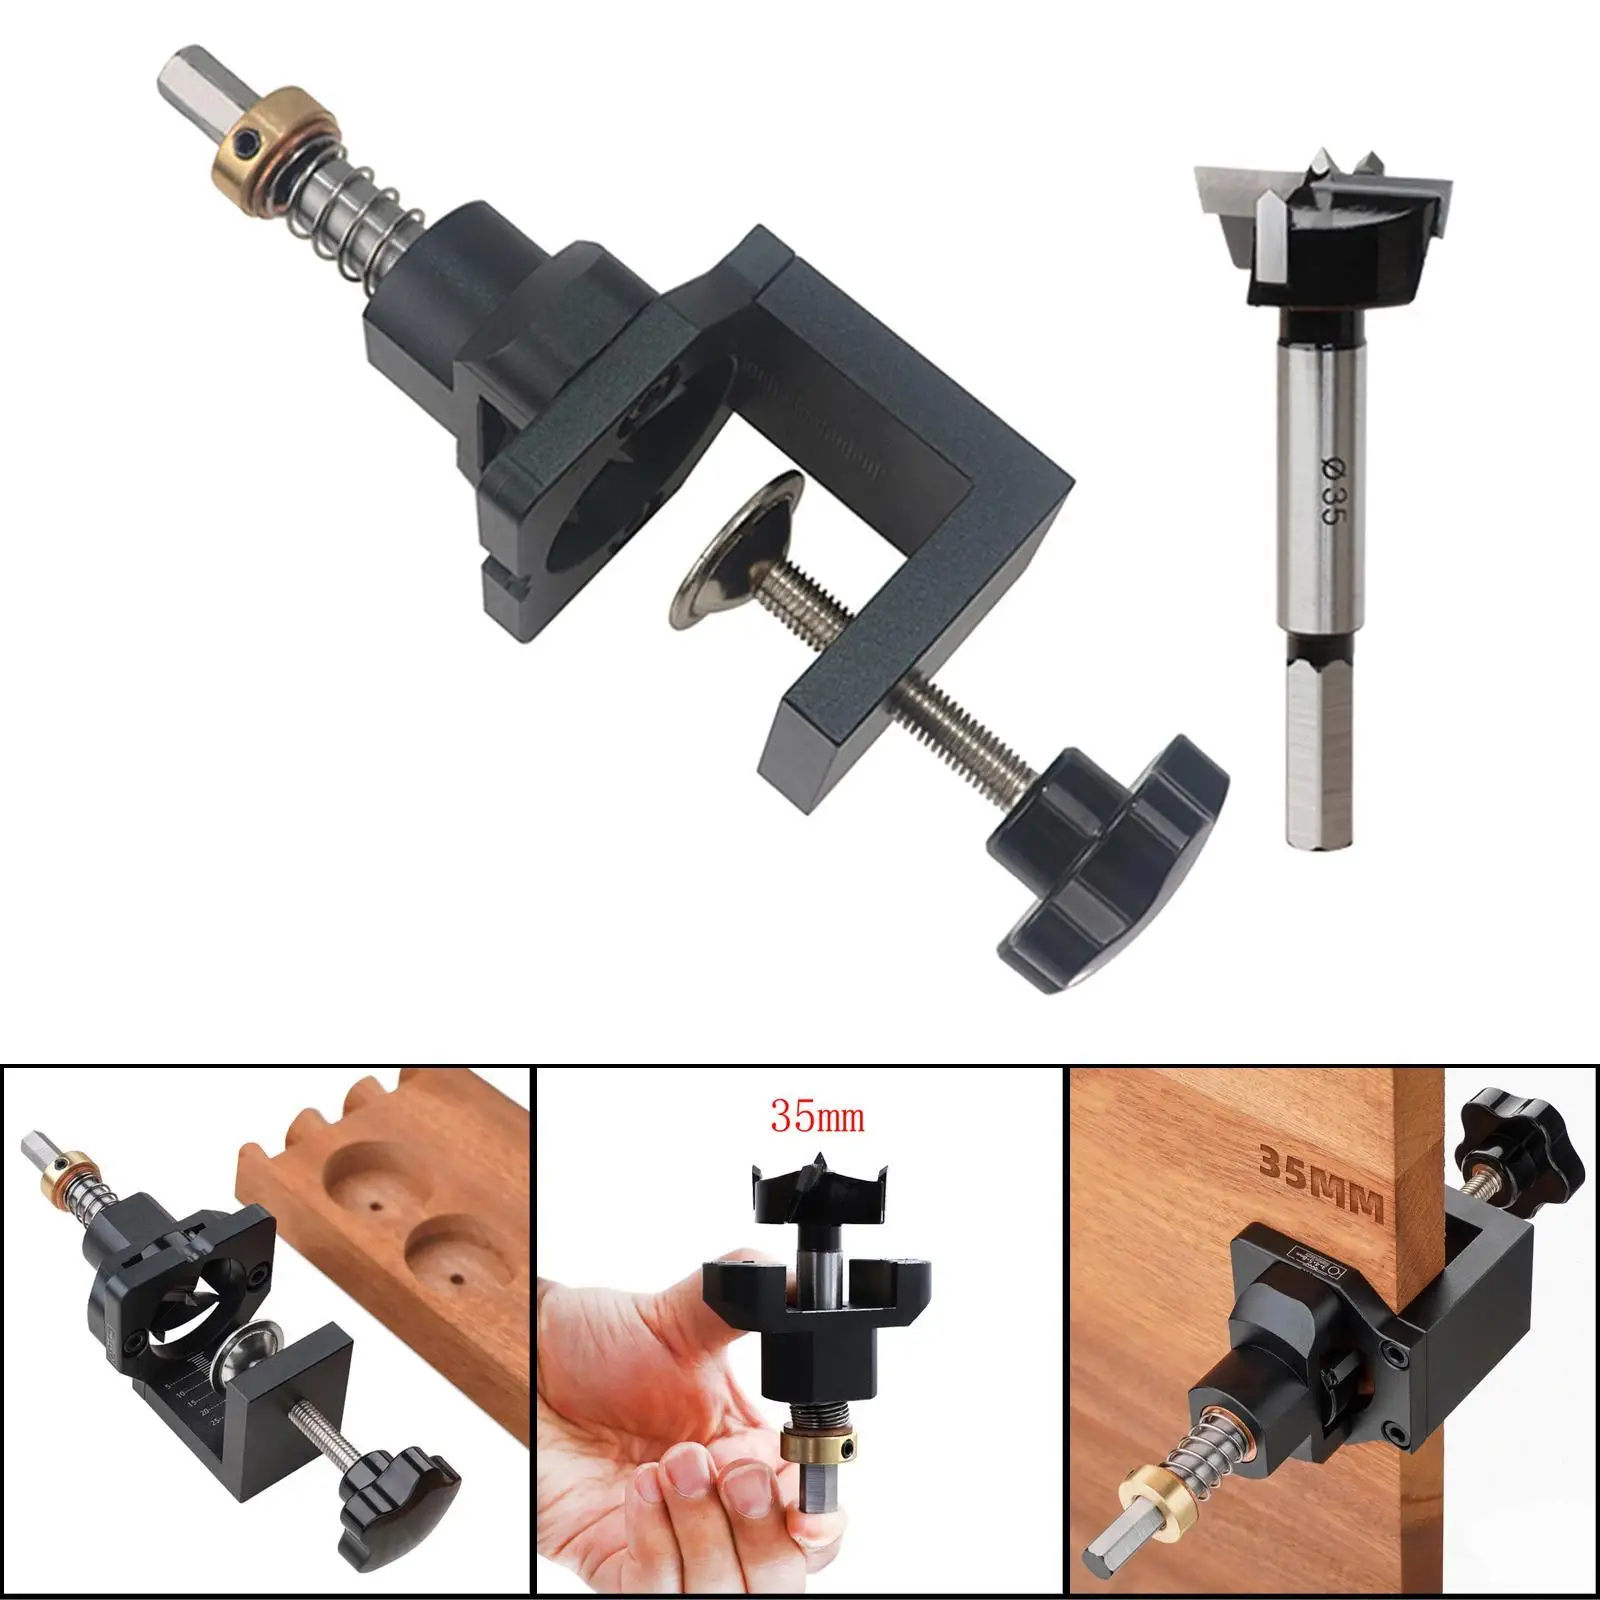 Hole Drill Jig Tools Kit Puncher Hinge Guide for Woodworking Cabinet